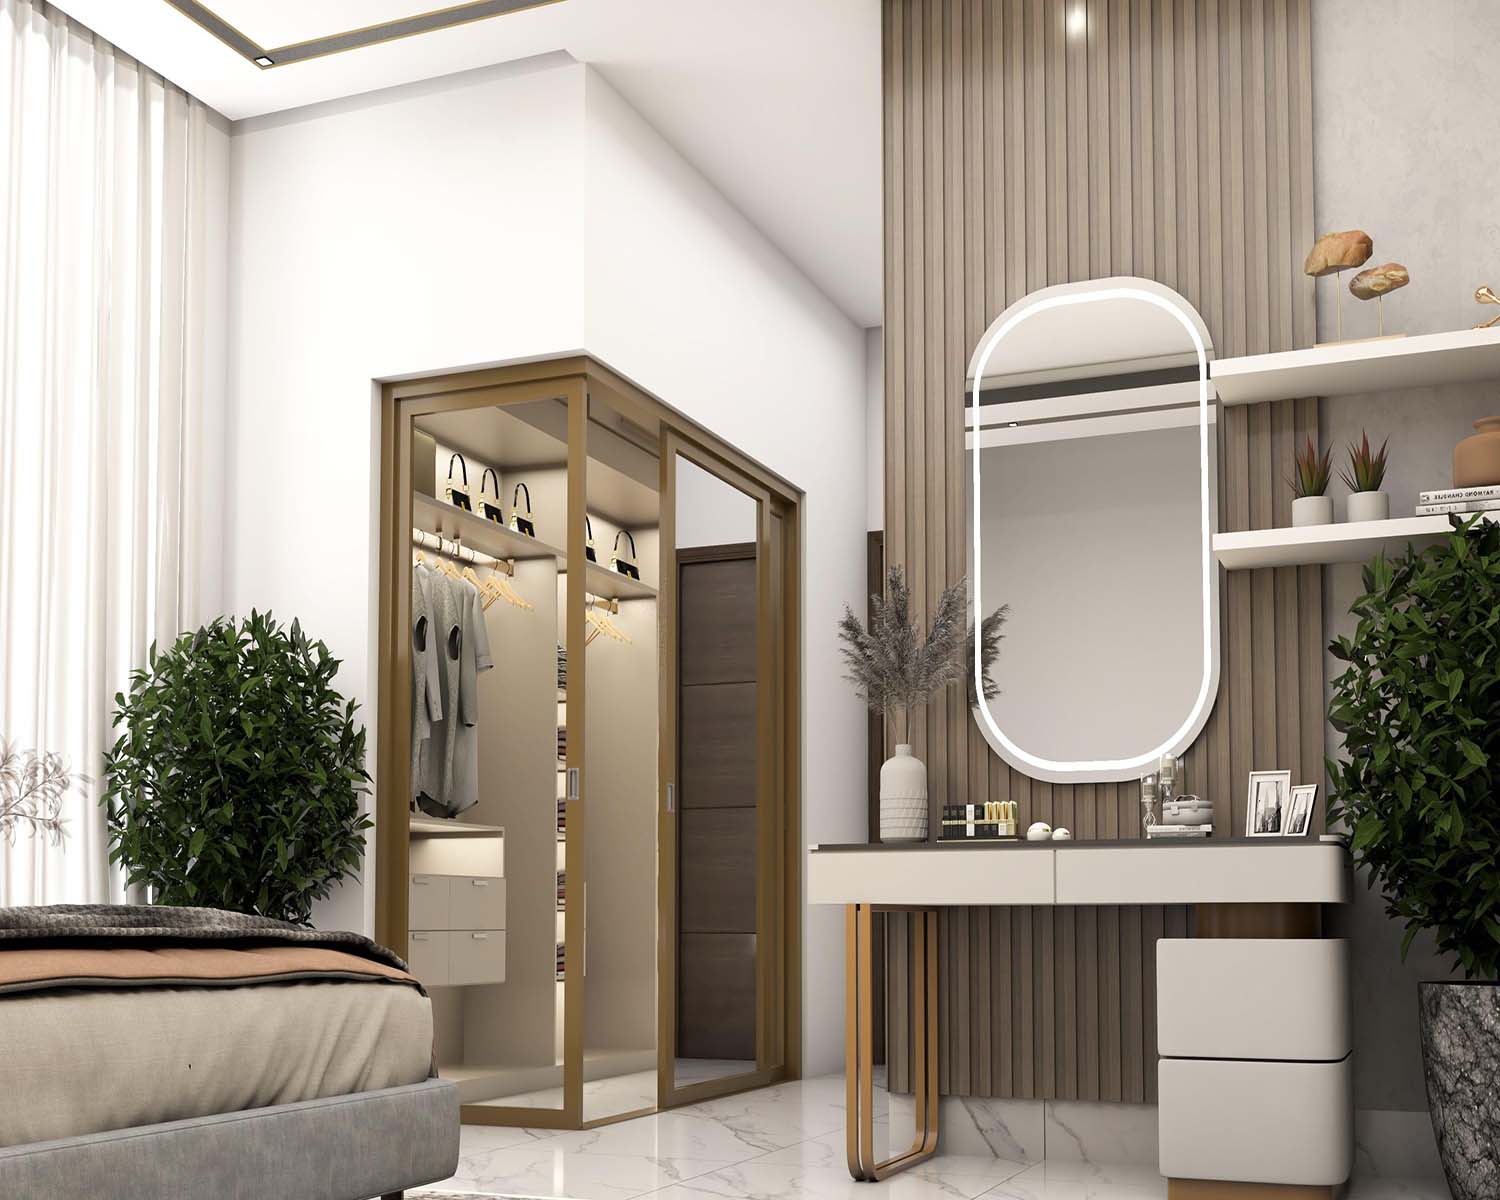 3D model of luxury room in dubai, placed a dressing table next to glass wardrobe